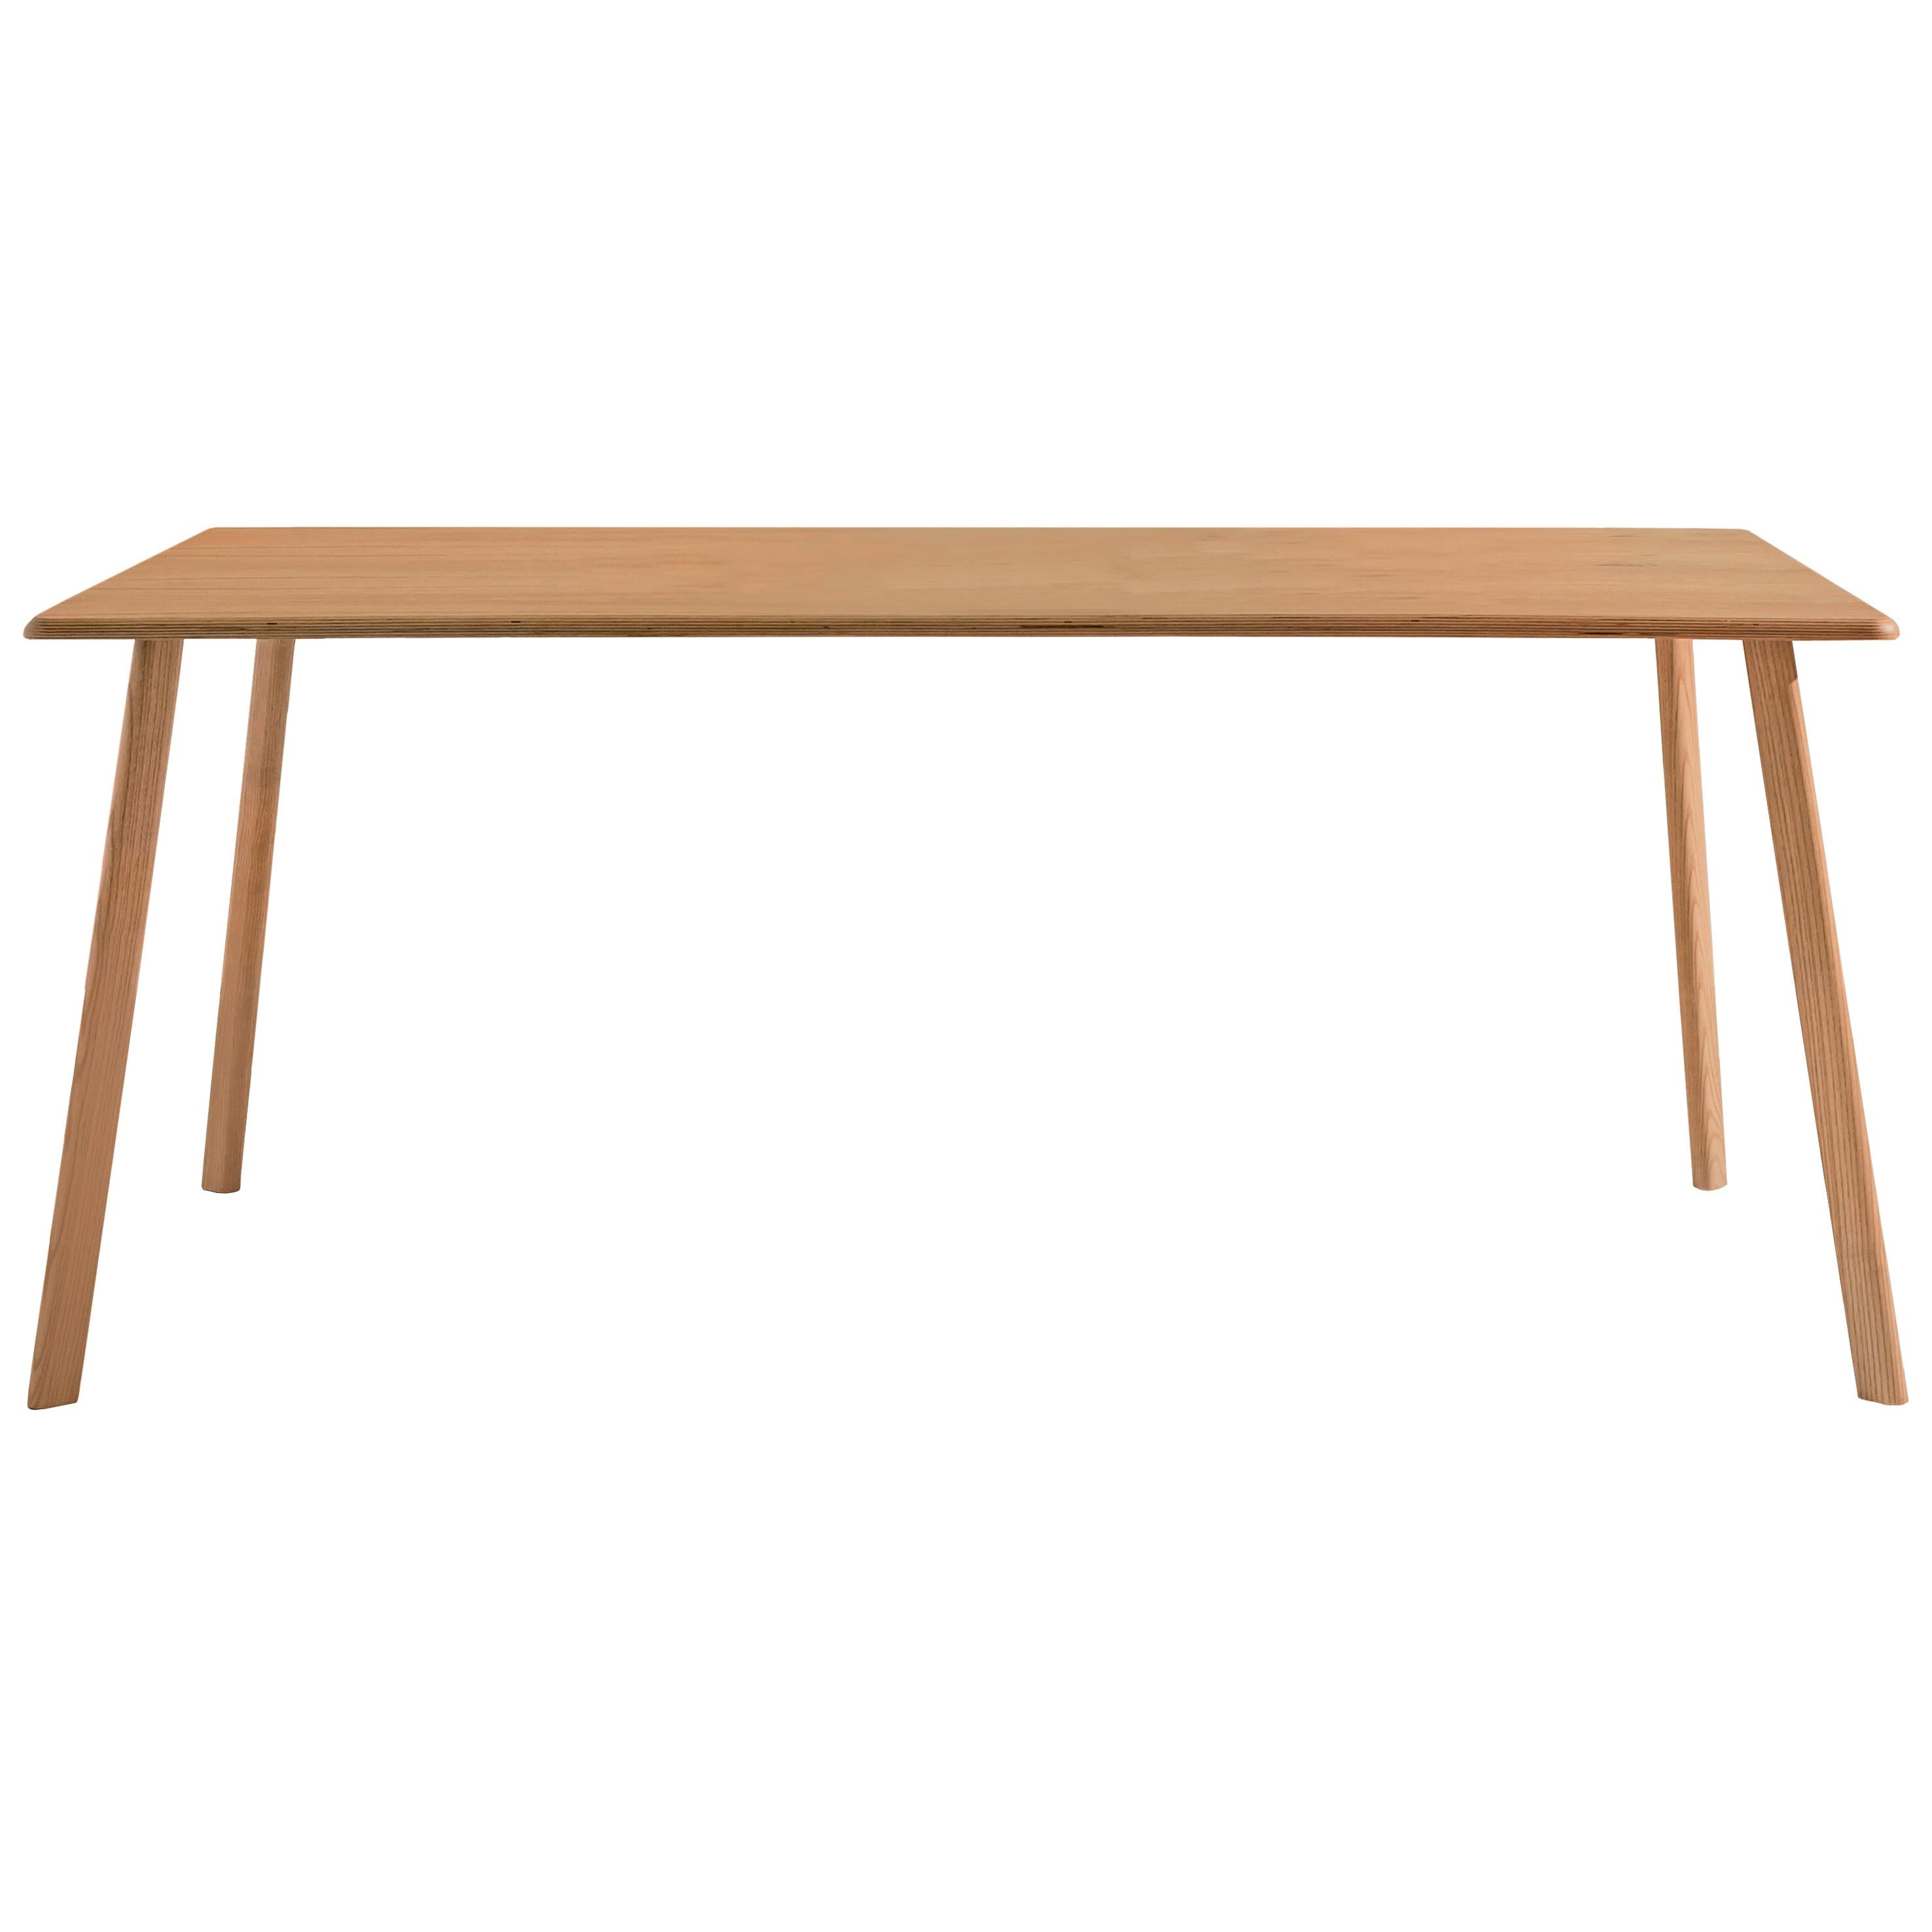 Spillo Dining Table, Ash Legs and Multi-Layer Birch Wood Top by Discipline Lab For Sale